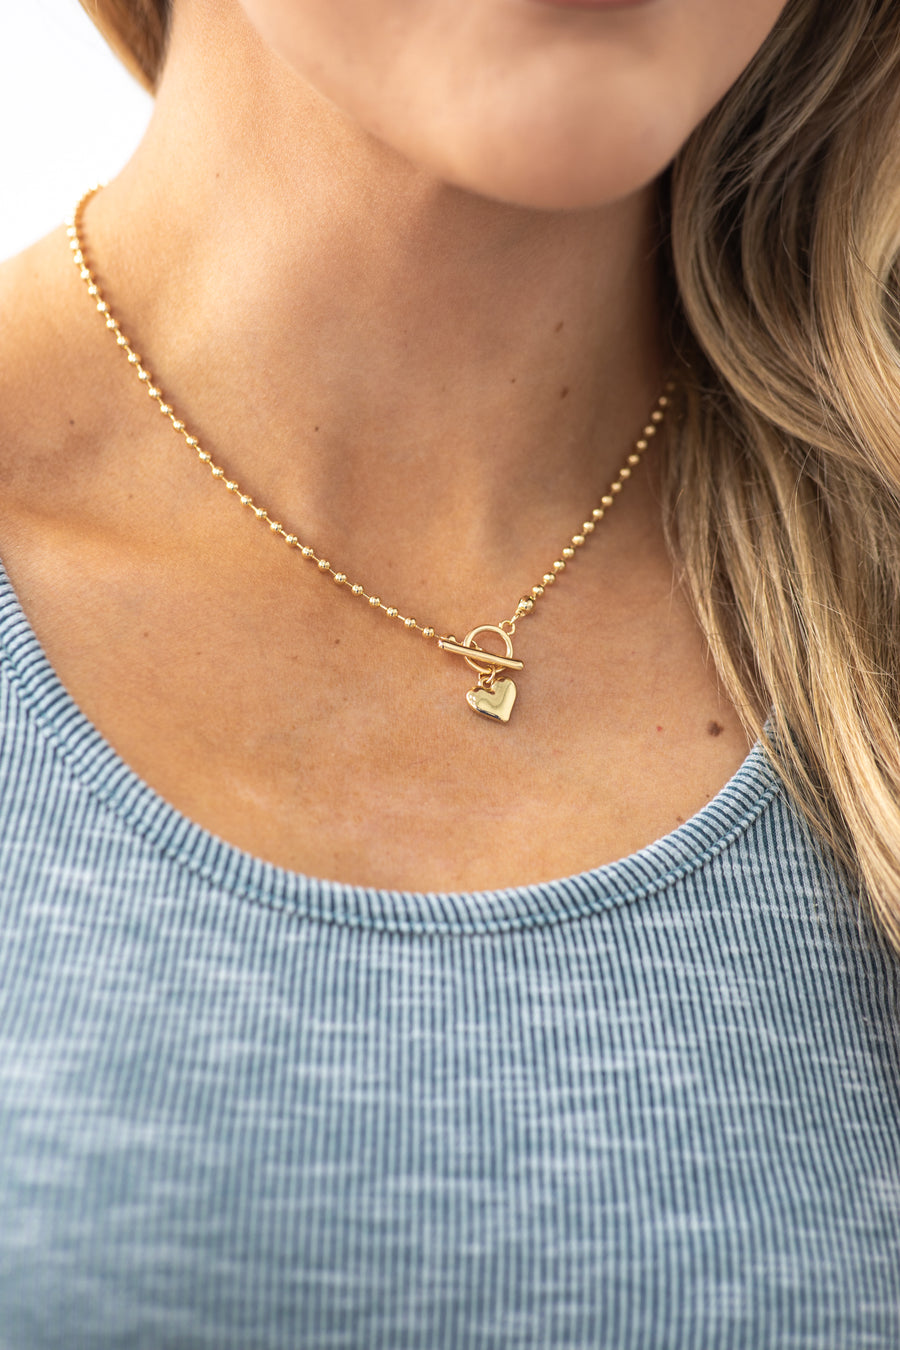 Gold Toggle Necklace With Heart Charm